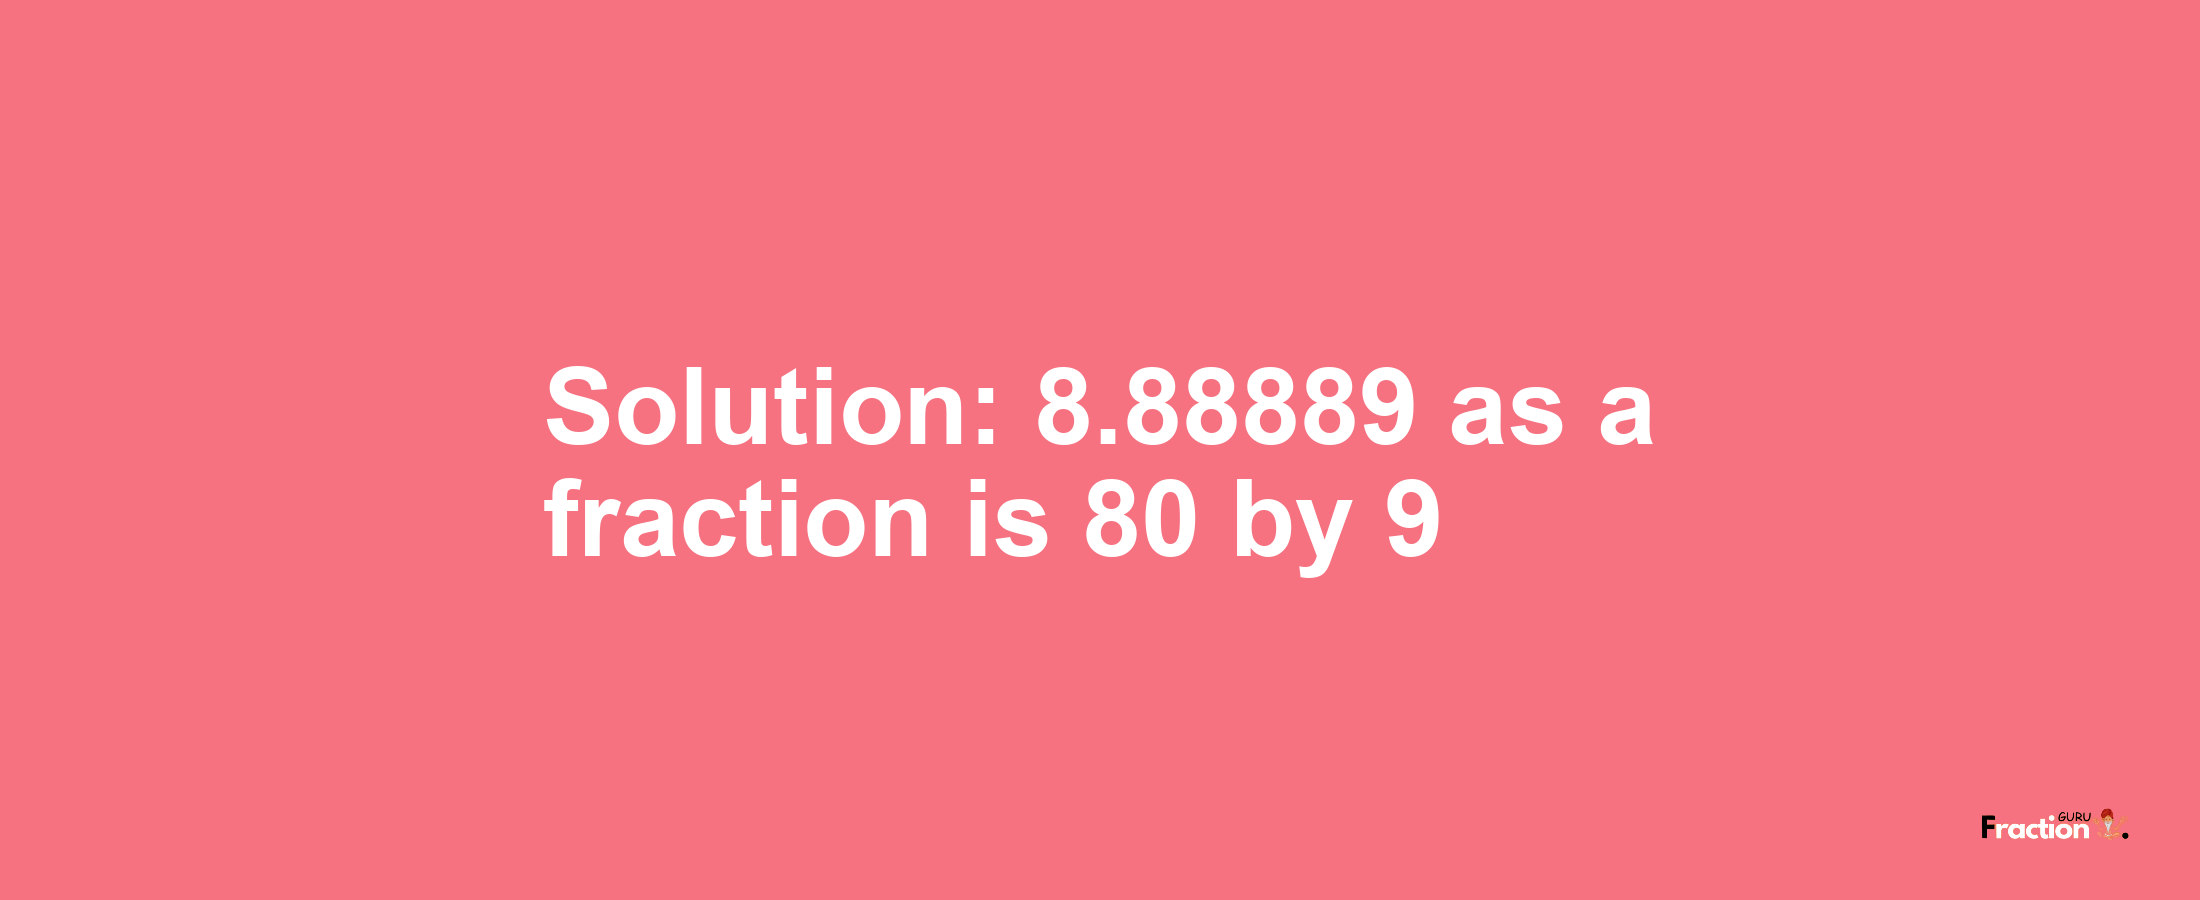 Solution:8.88889 as a fraction is 80/9